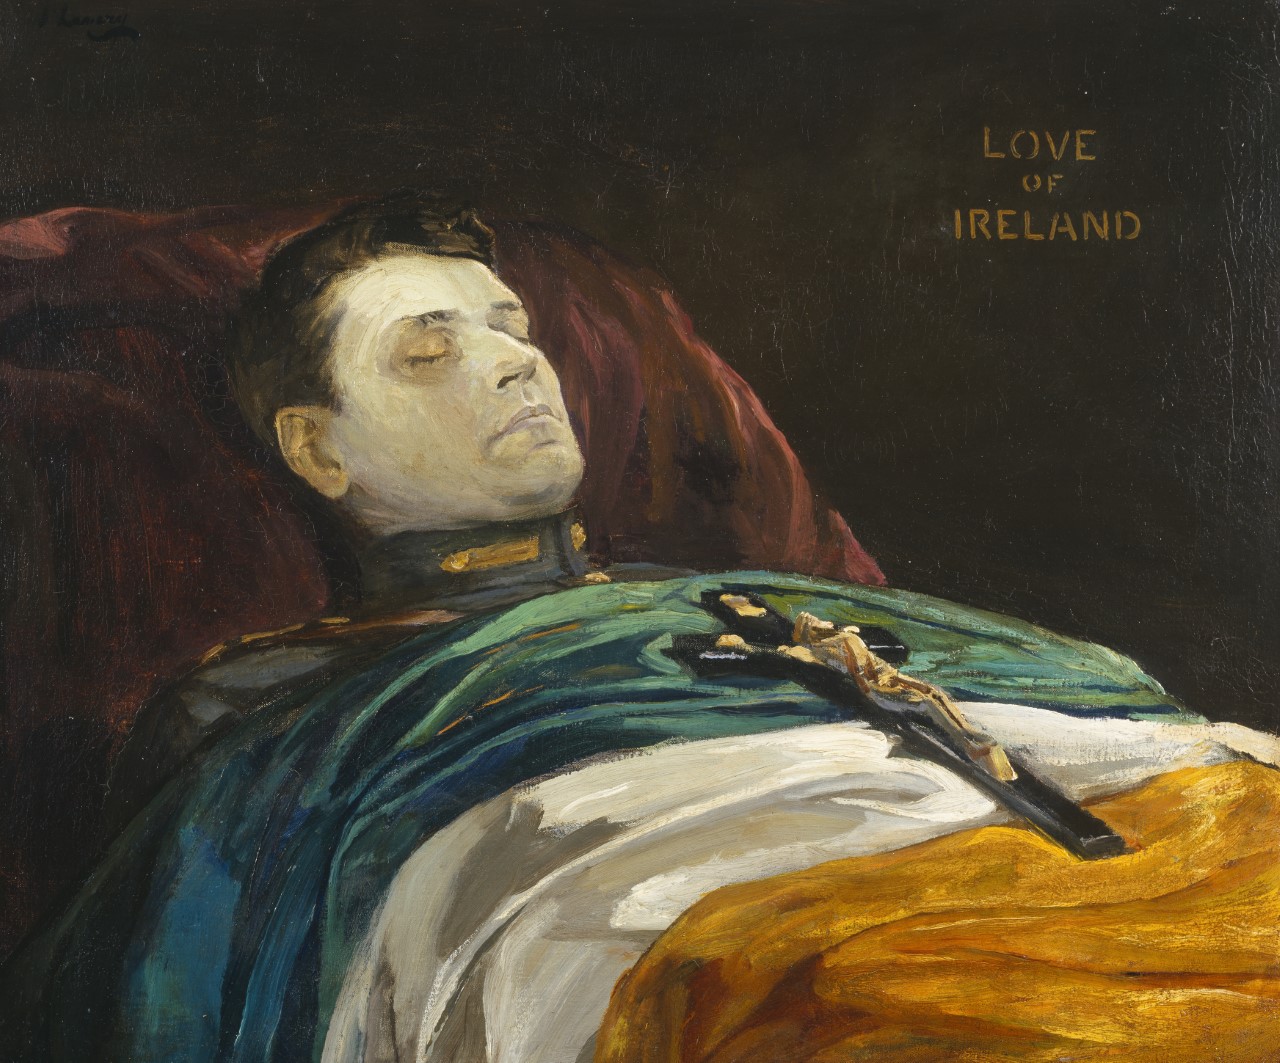 John Lavery, Michael Collins (Love of Ireland) (1922). Collection and image © Hugh Lane Gallery (Reg.744).